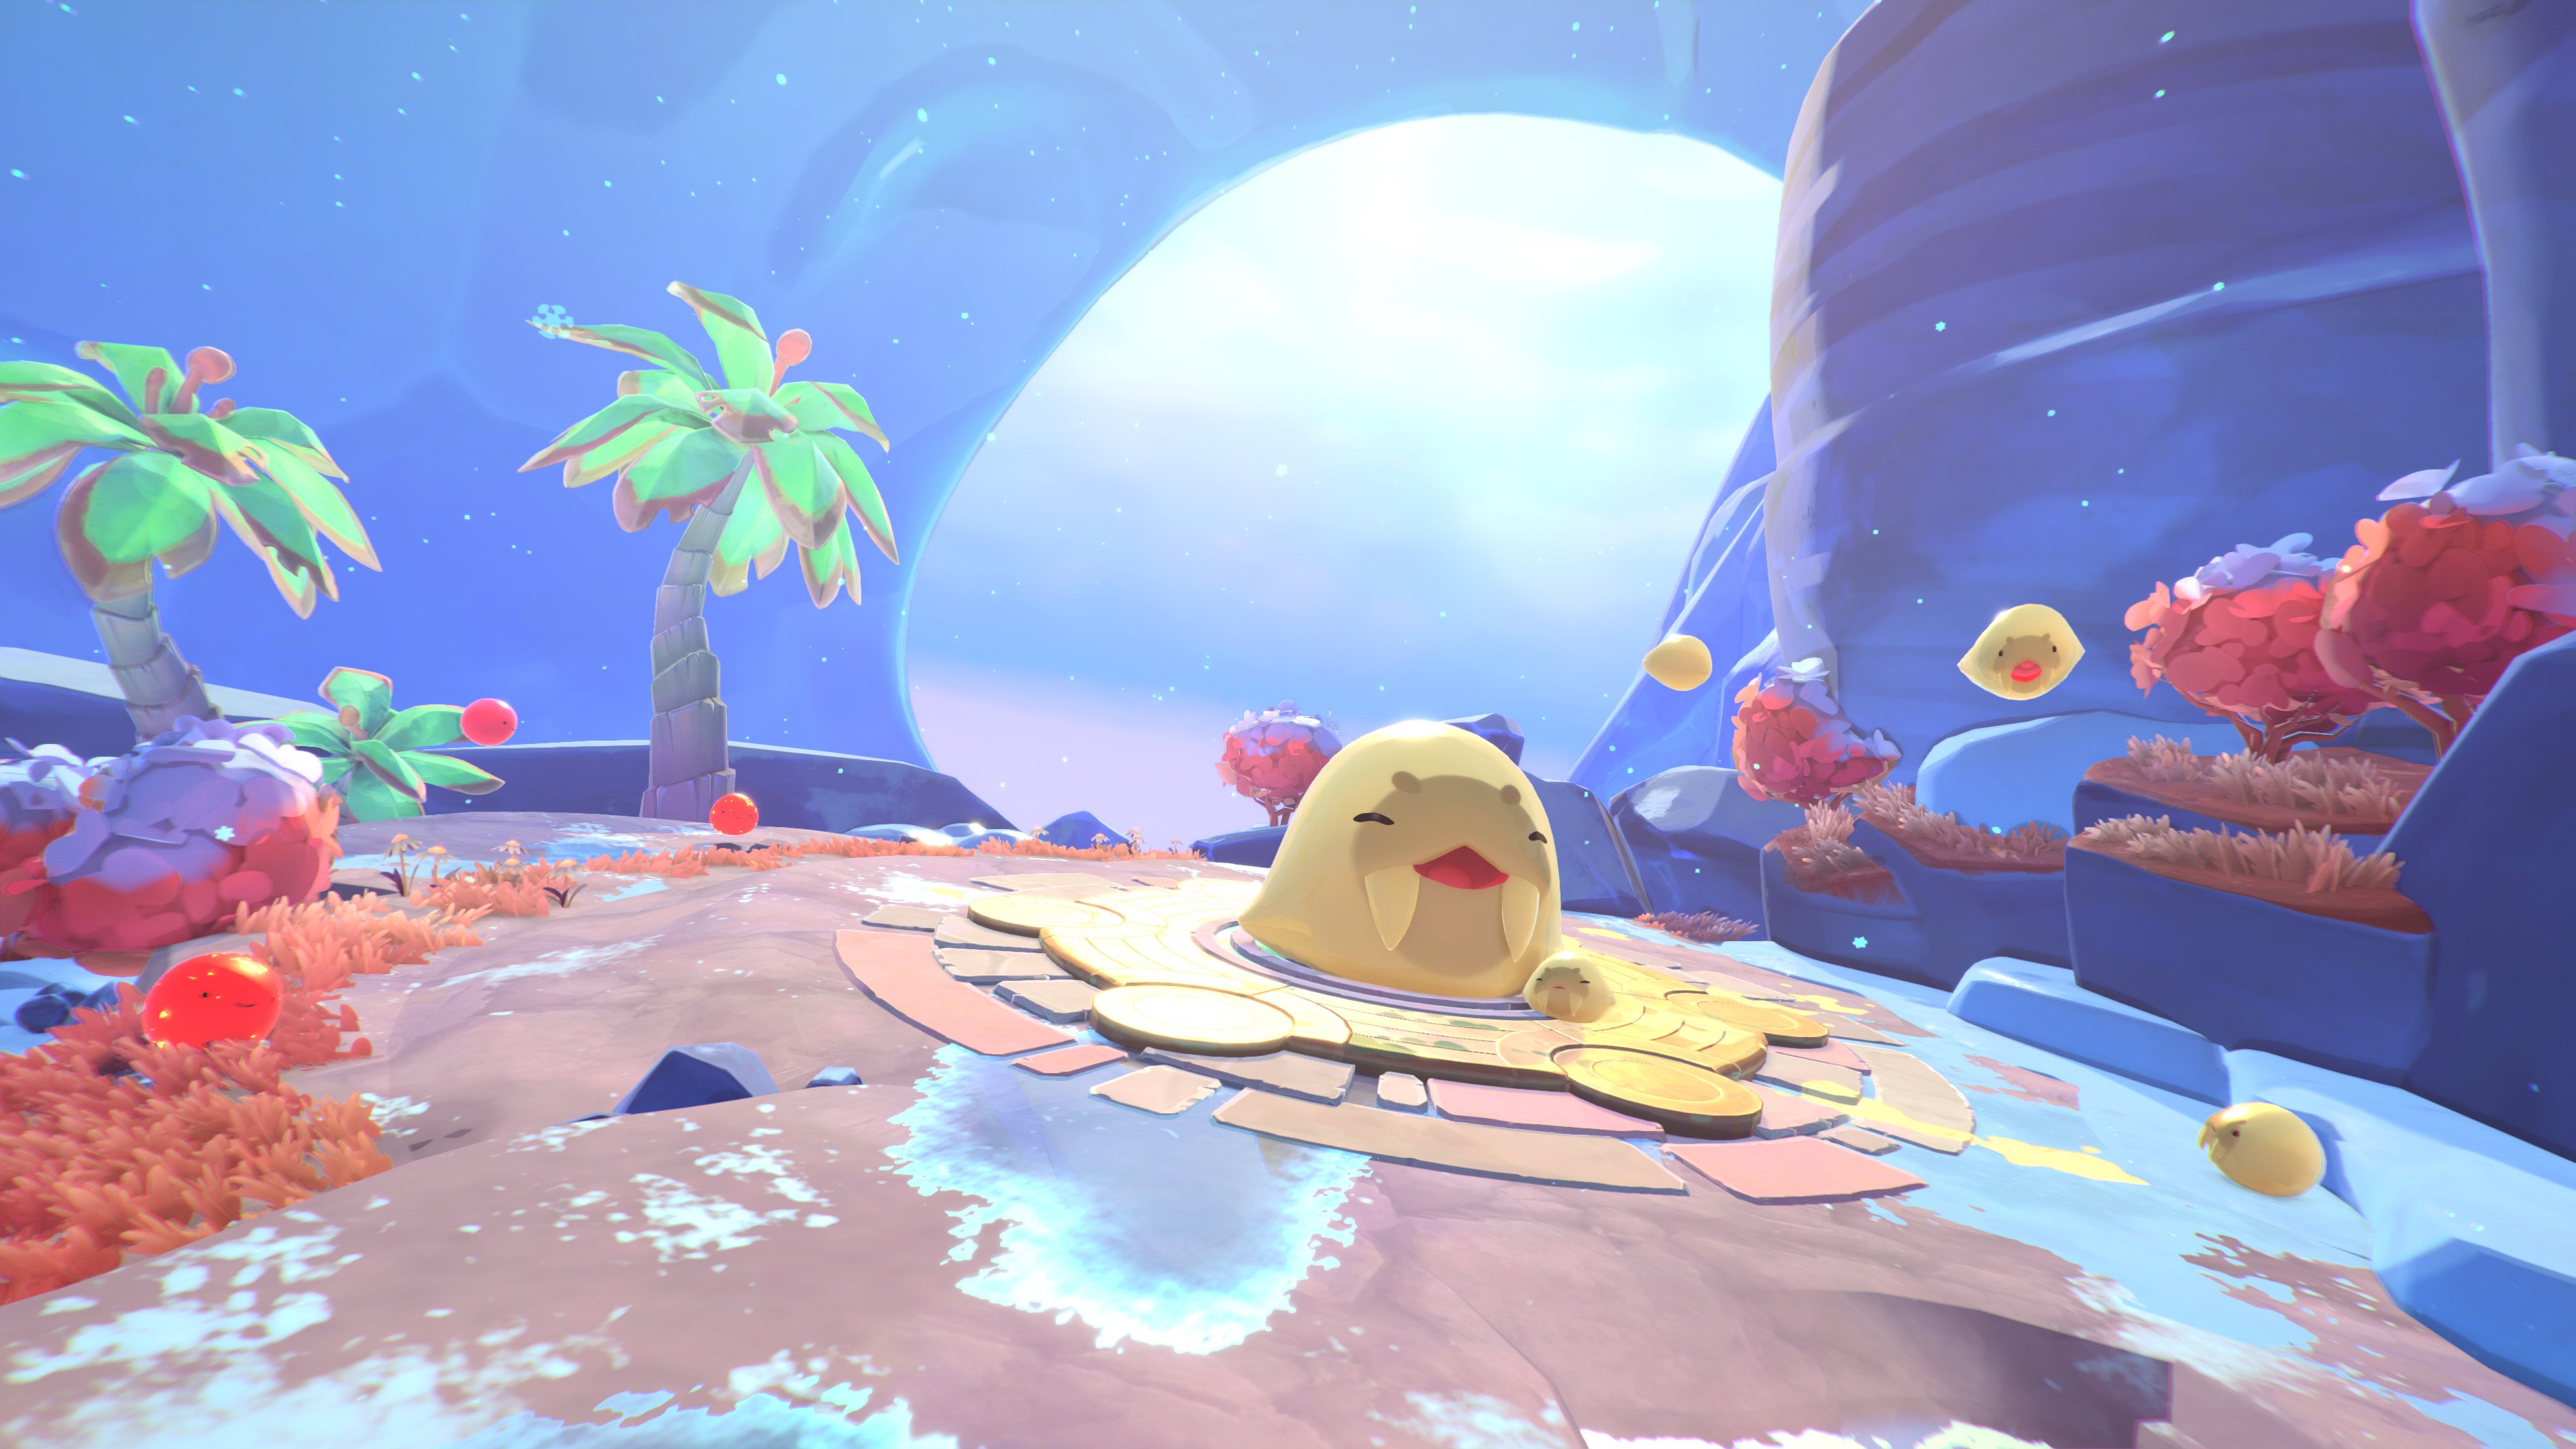 Slime Rancher 2 release date, time, early access details, and more